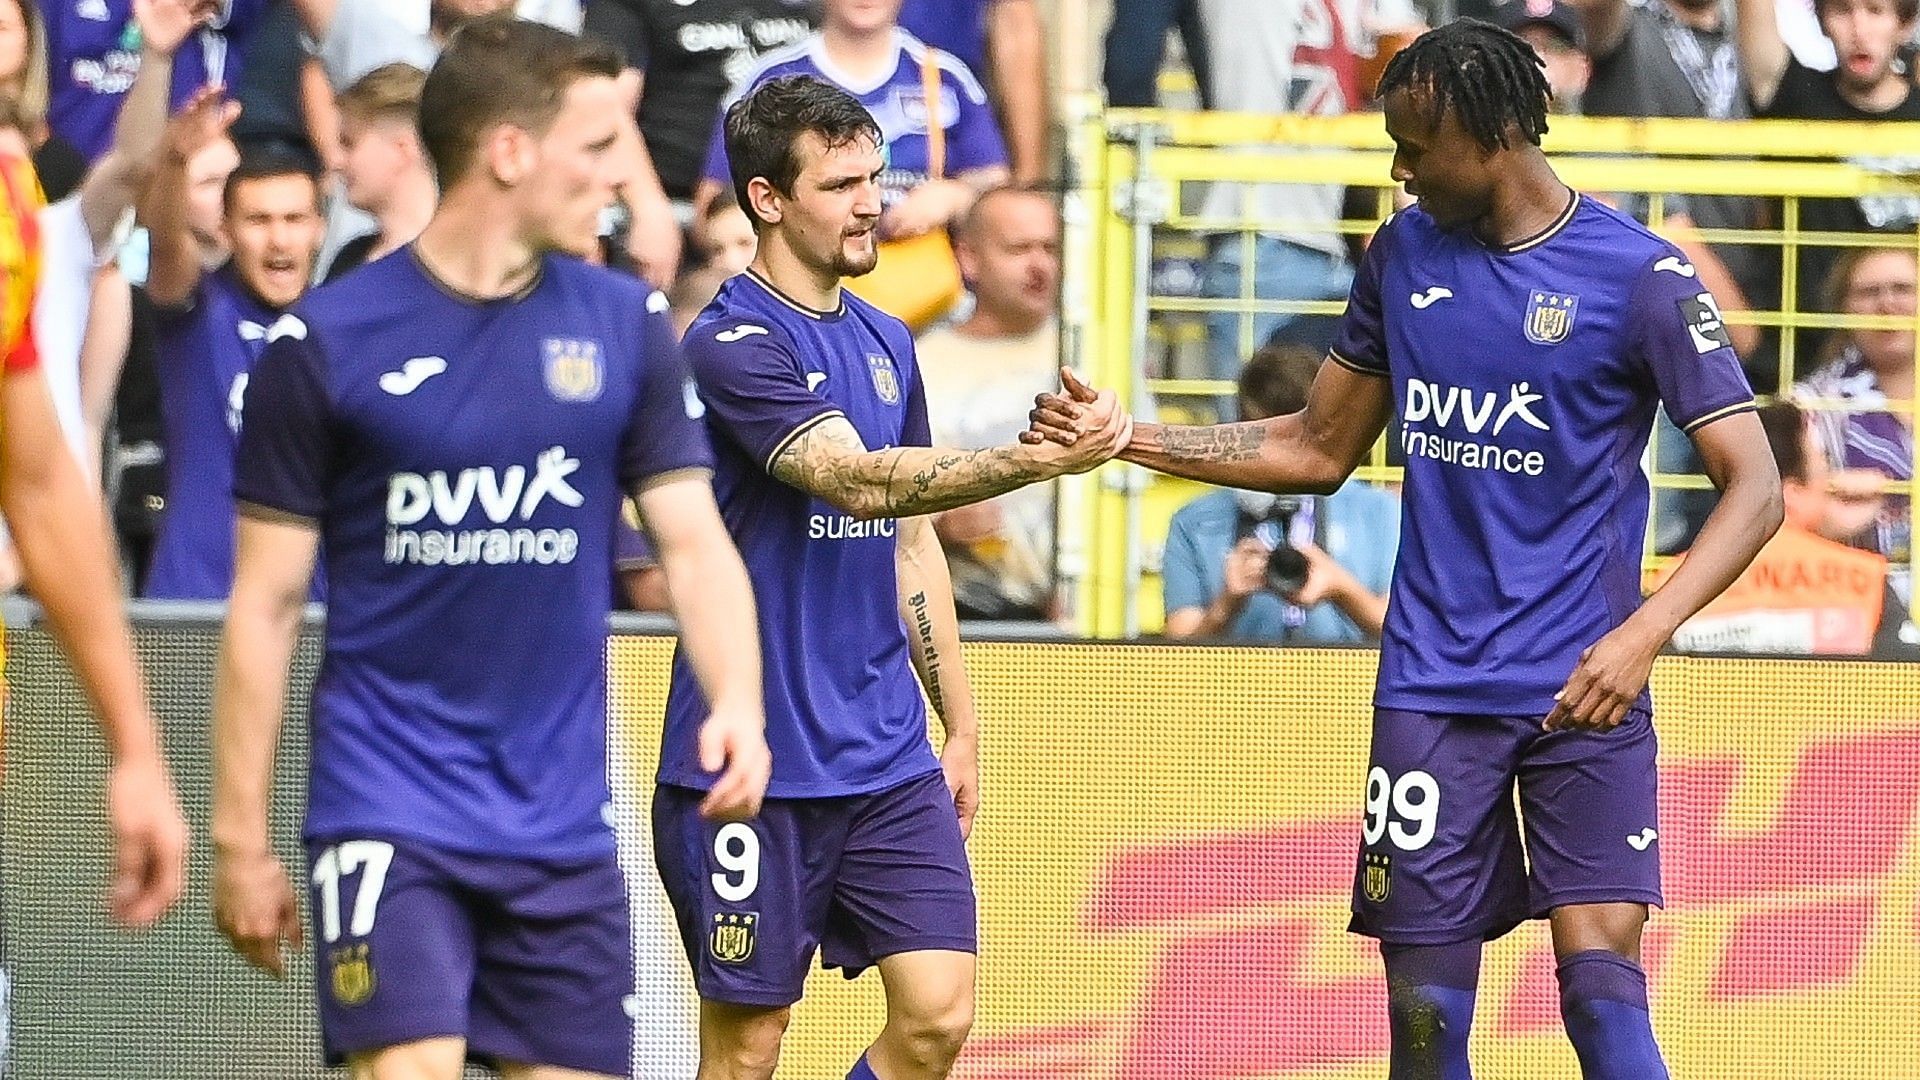 Anderlecht face Paide in their UEFA Europa Conference League qualifier on Thursday